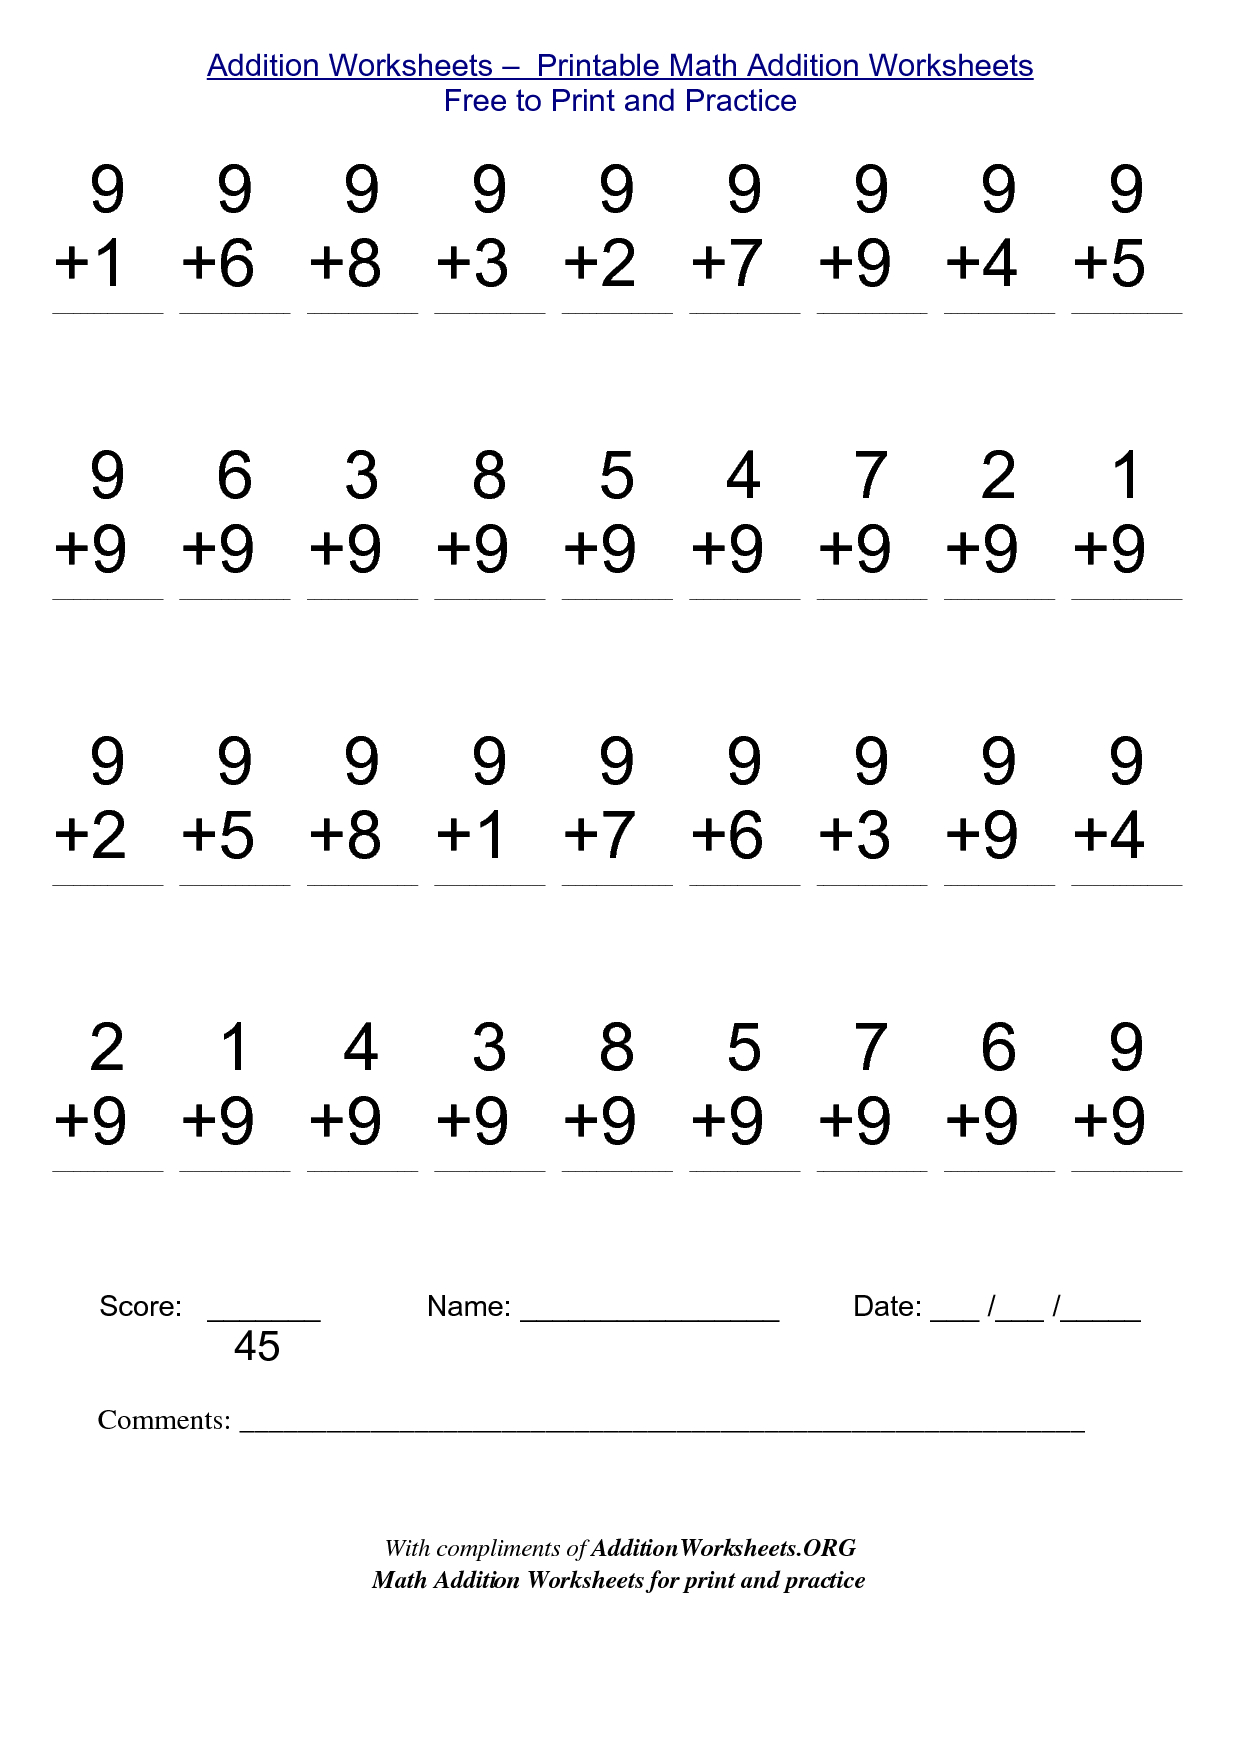 Math Worksheets For Free To Print - Alot | Me | Pinterest | Math - Free Printable Second Grade Worksheets